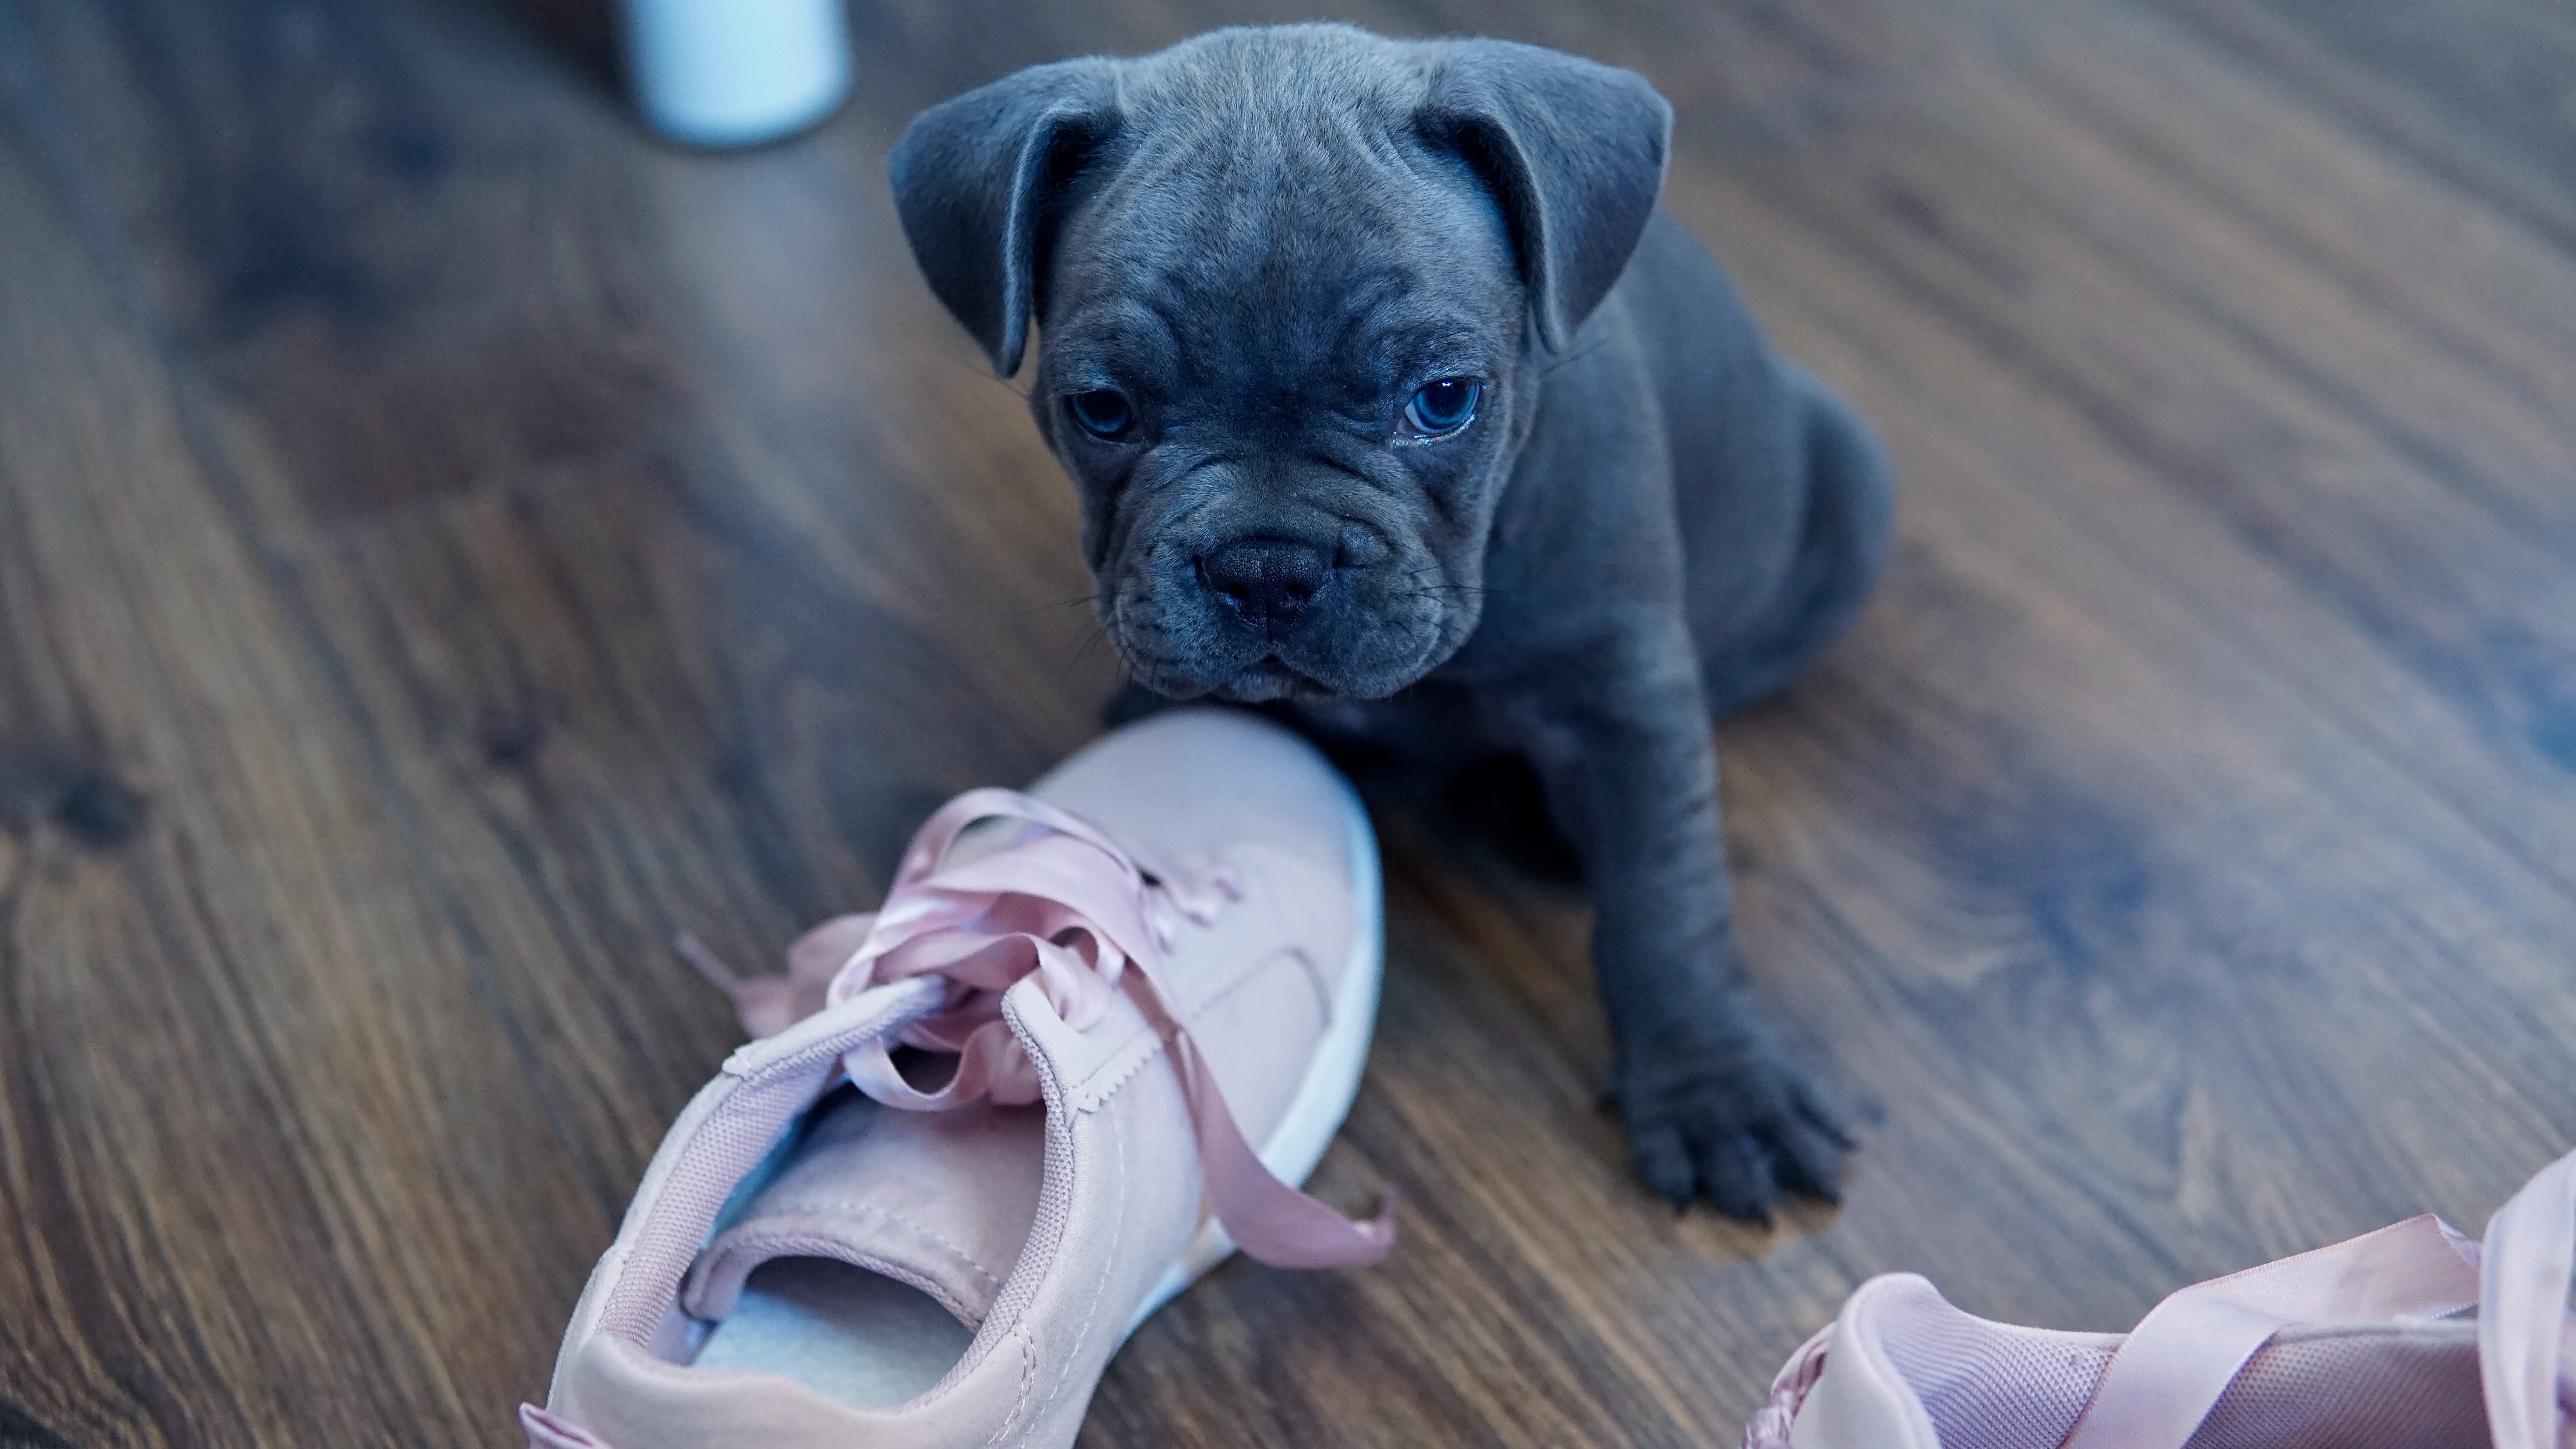 cute French bulldog puppy with gray coat